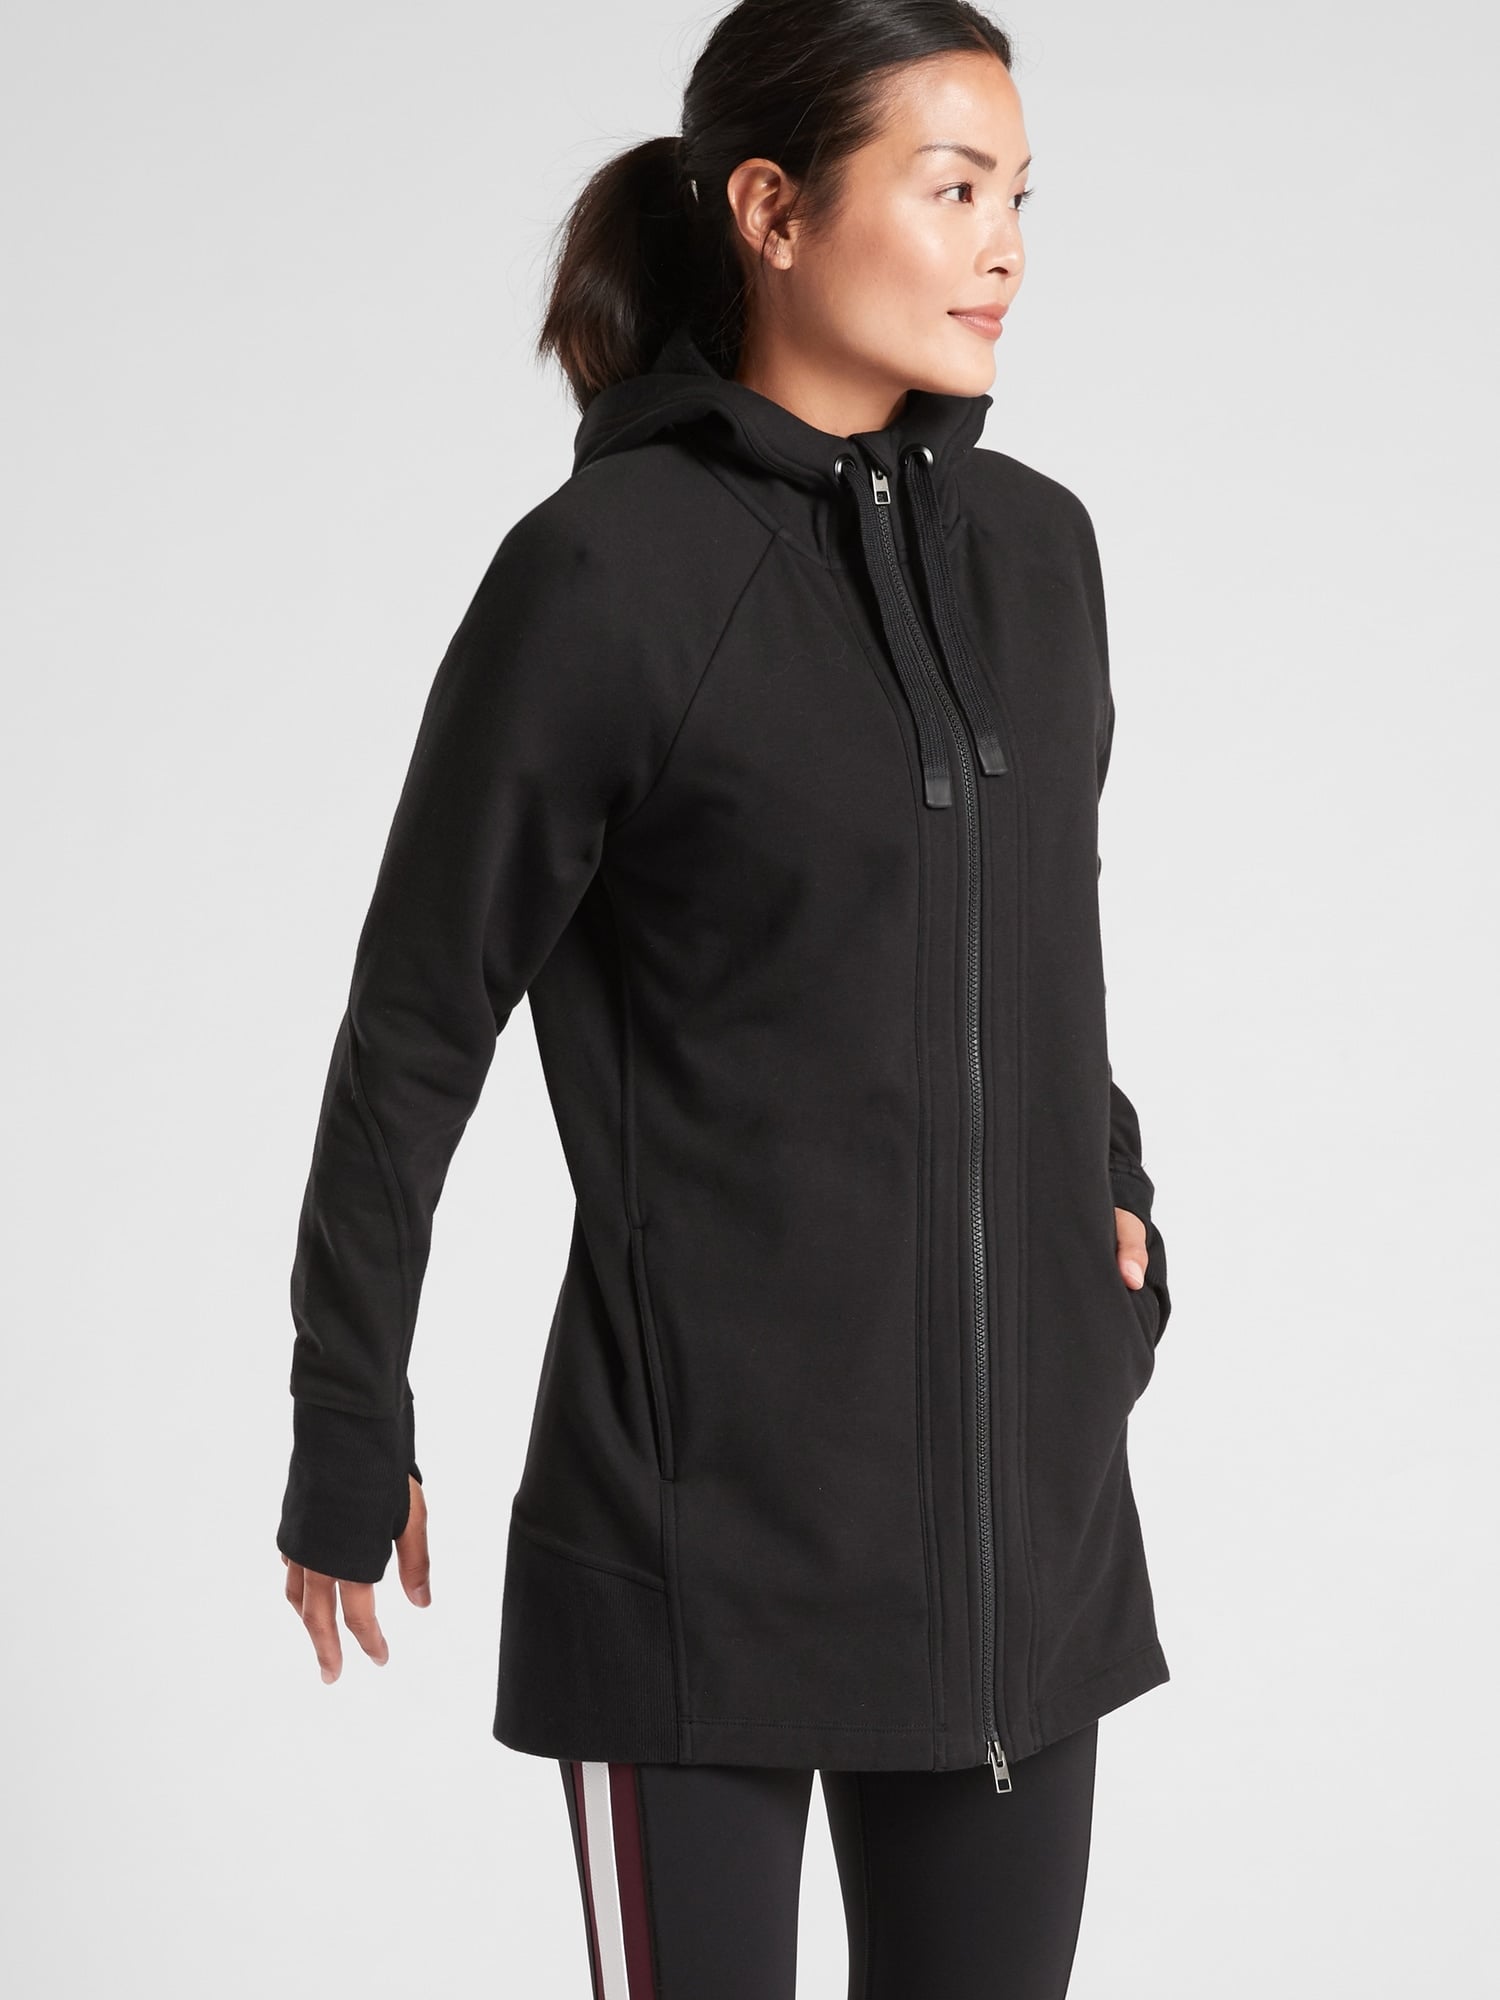 Athleta Triumph Long Hoodie  Here, I've Made It Easier to Shop